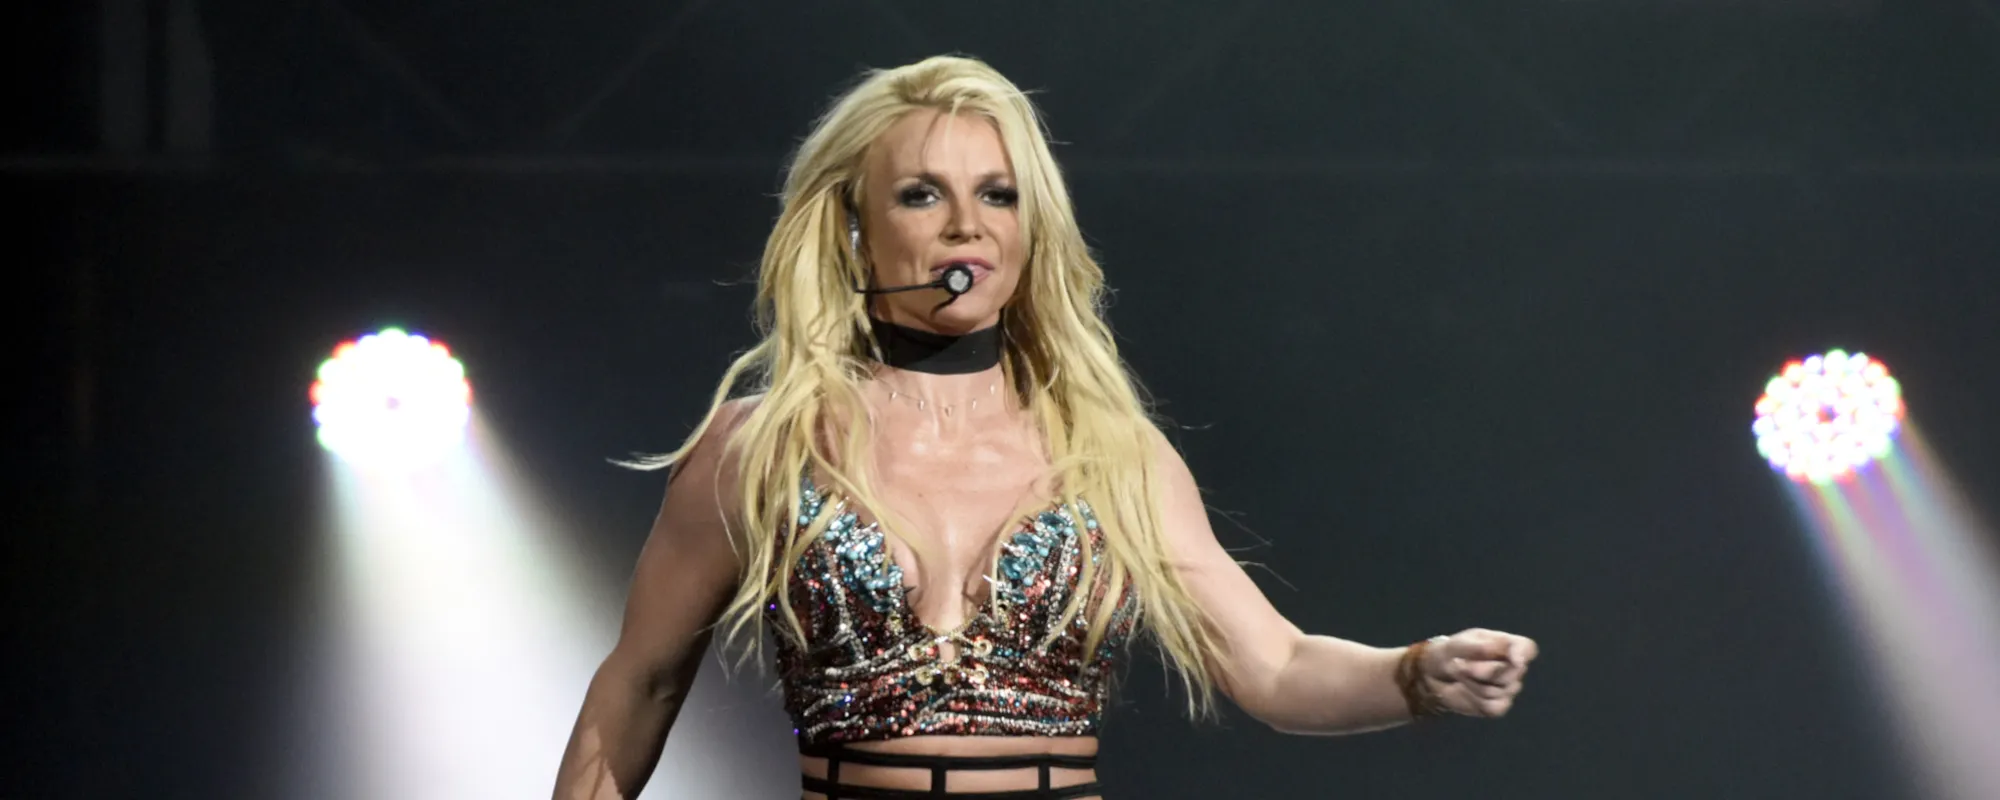 Britney Spears’ Dad Called to Give Deposition, While His “Revenge Deposition” Request of the Singer Still Undecided